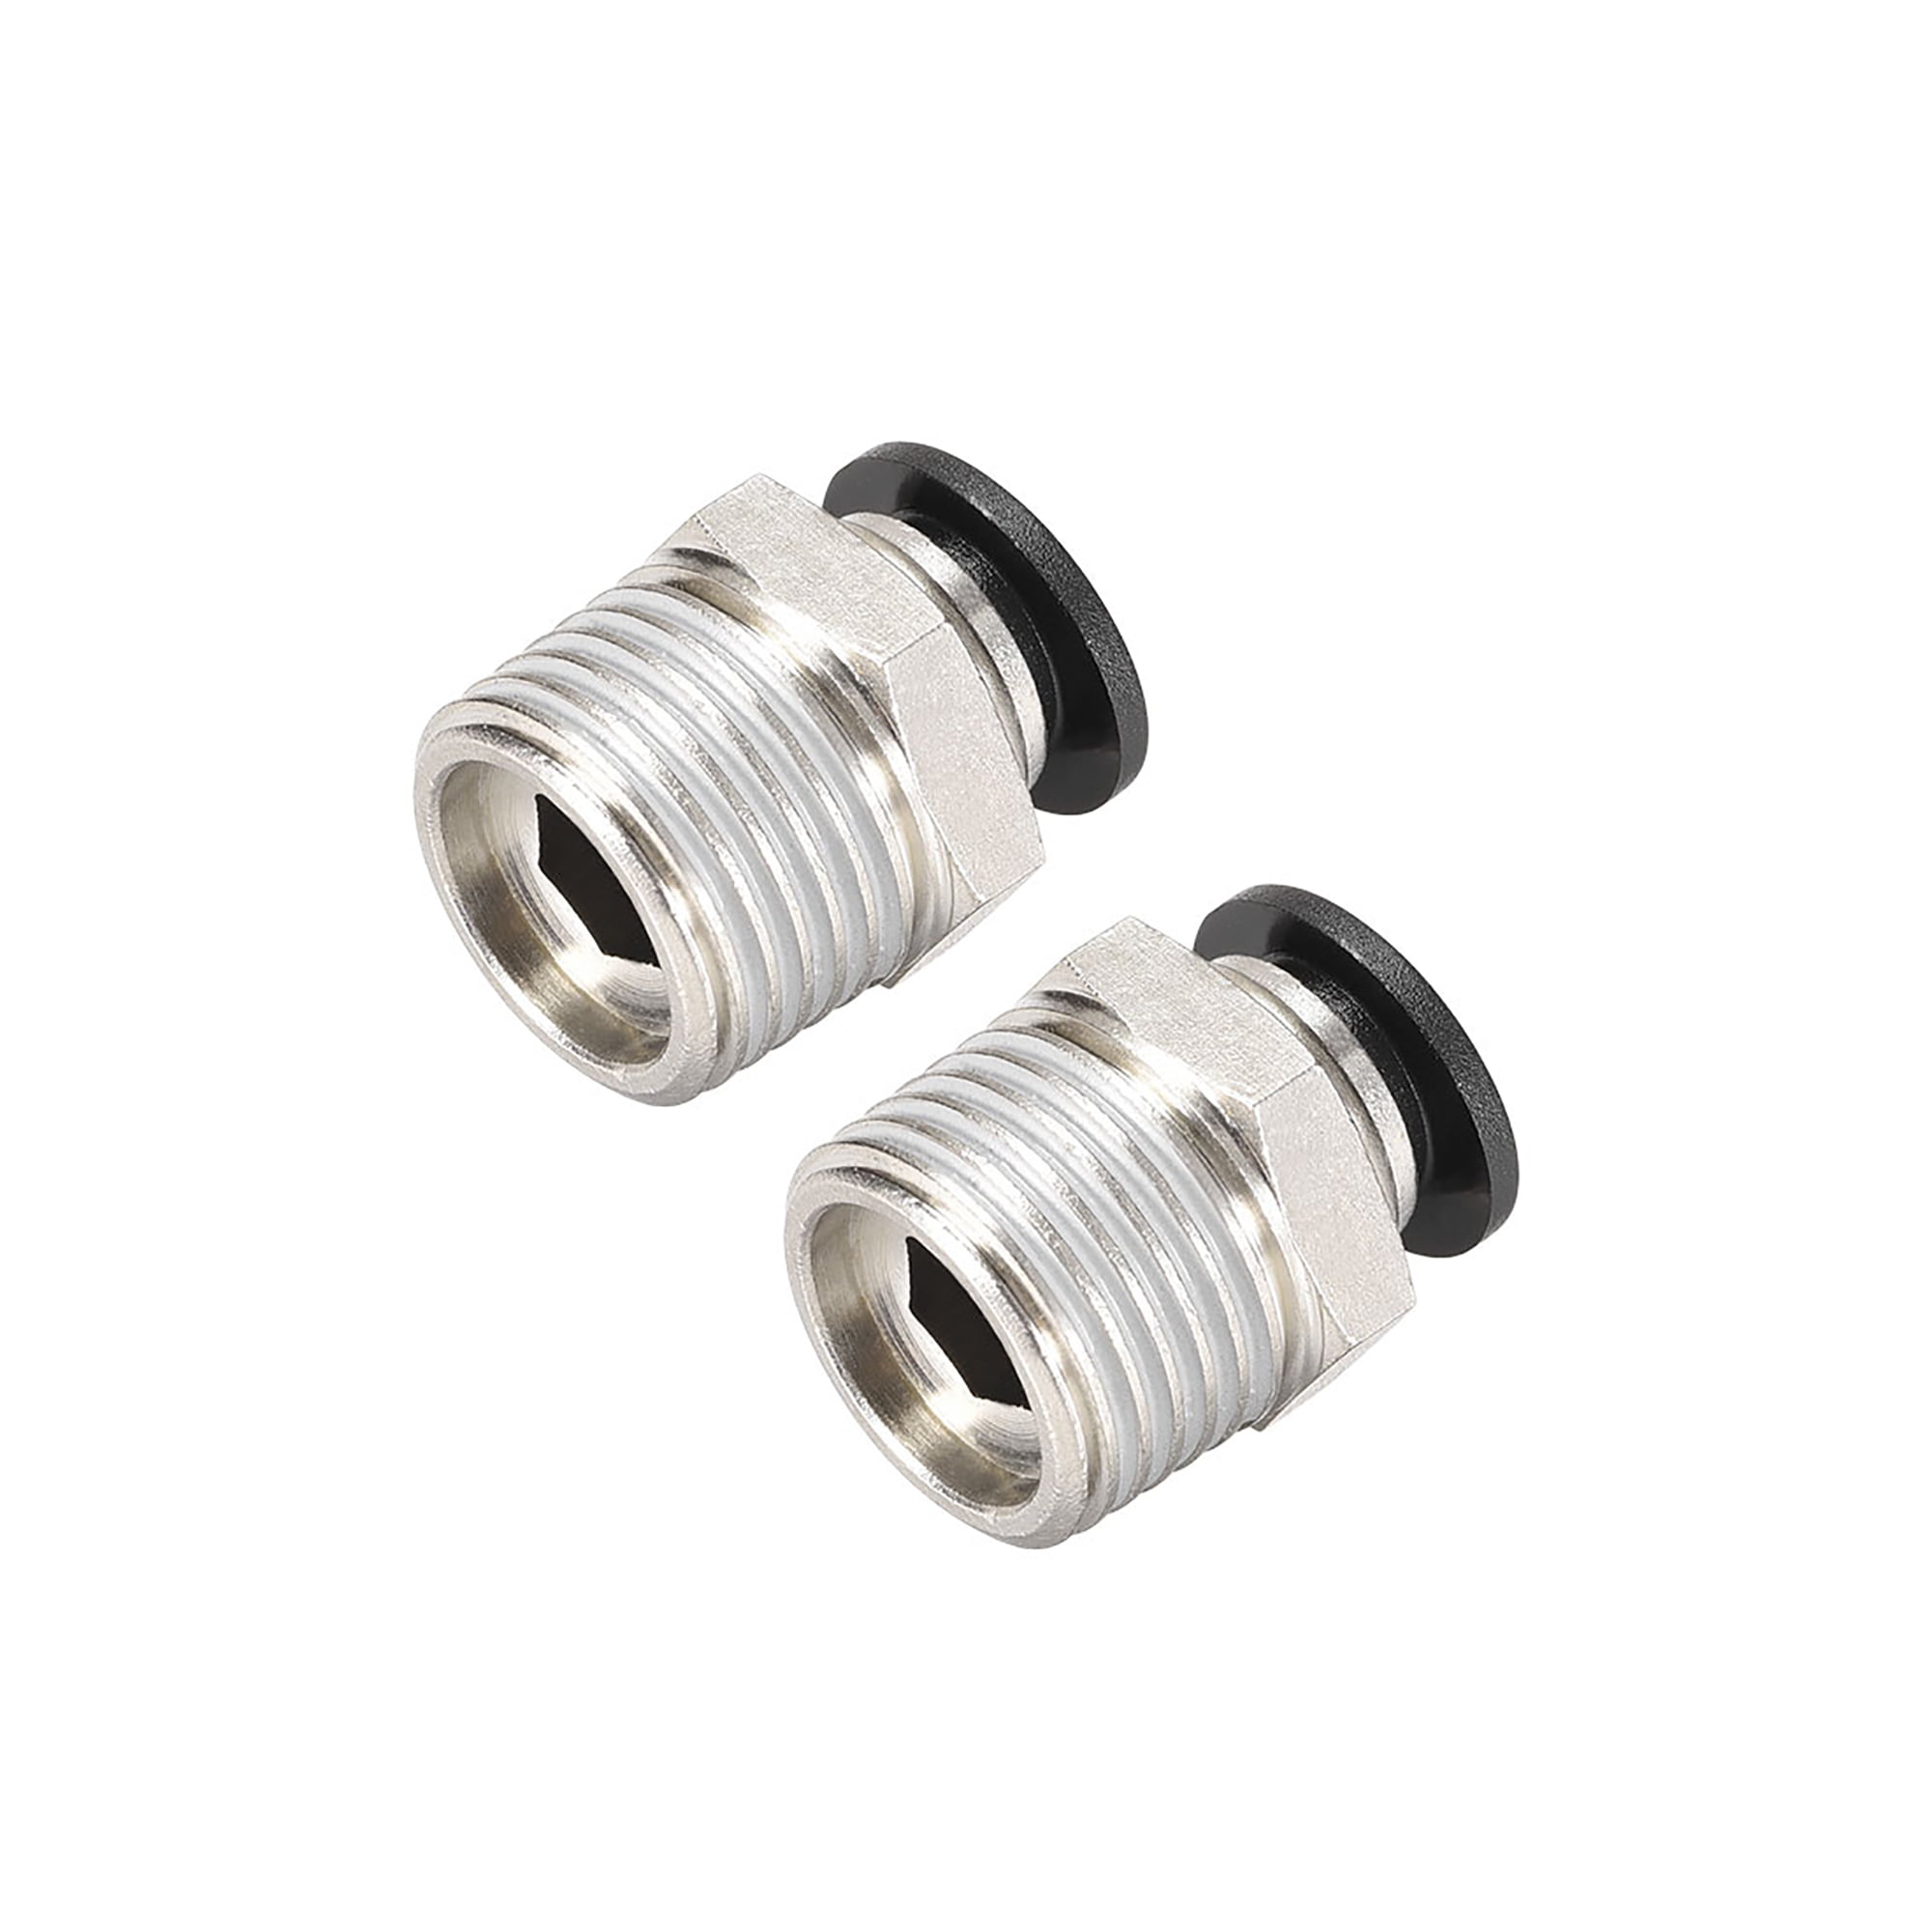 Pneumatic push-in quick release fittings connectors air water hose BSP thread 